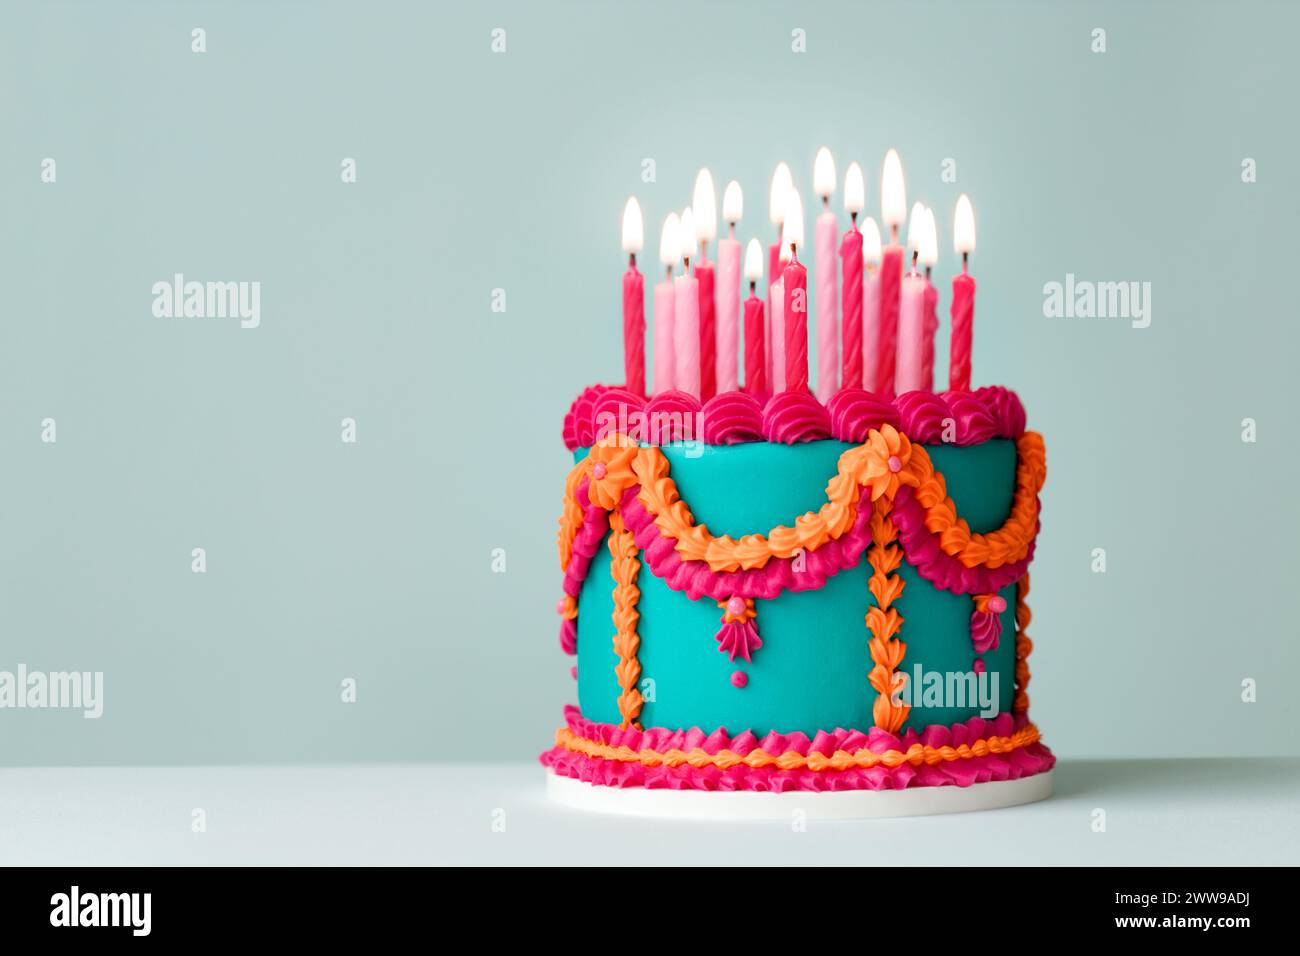 Elaborate jade colored birthday cake with pink and orange piped vintage style frills and birthday candles Stock Photo